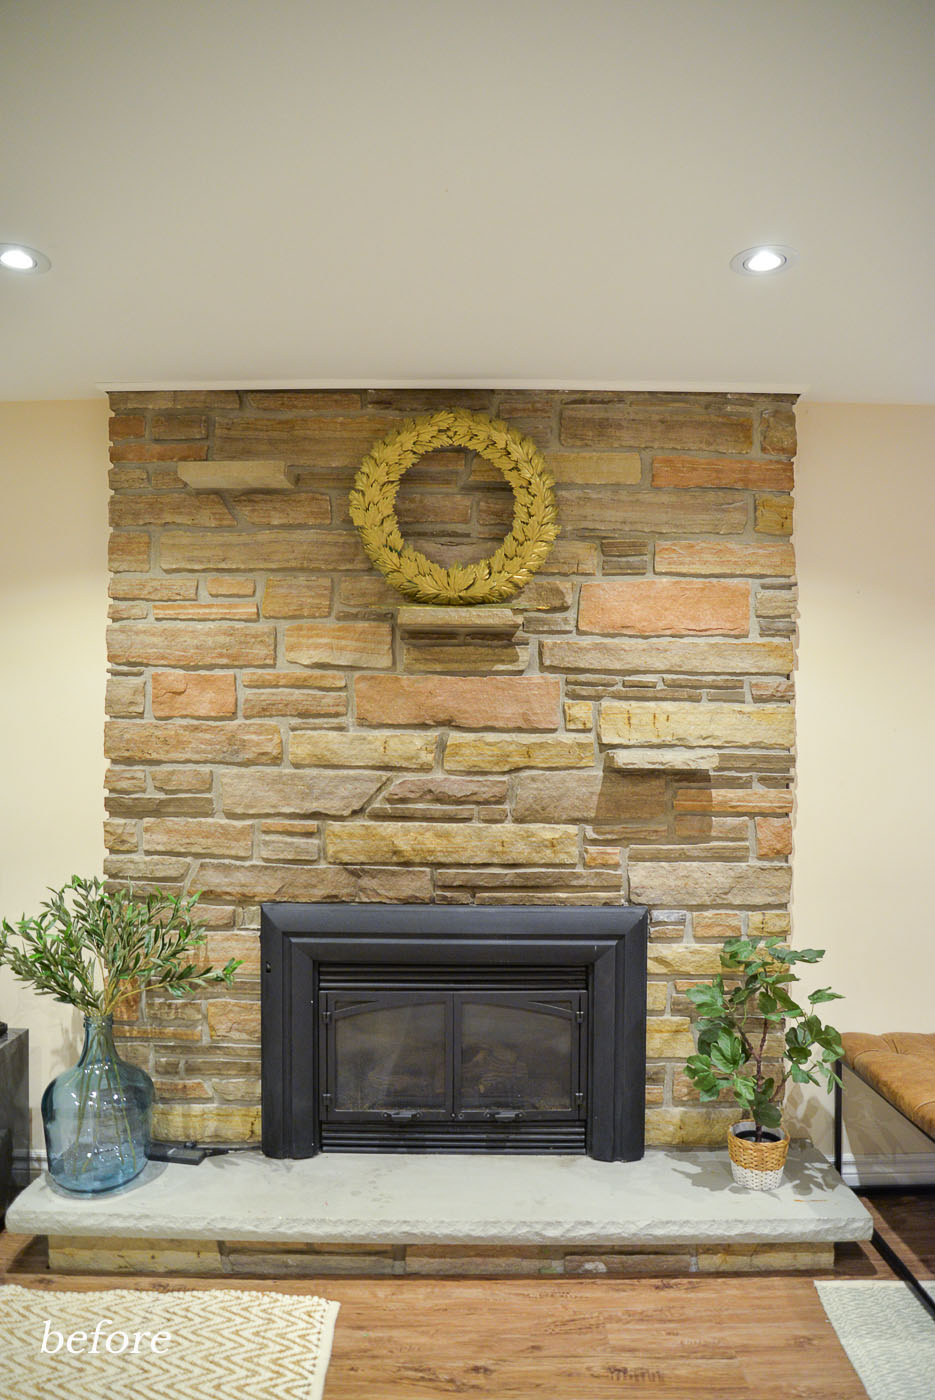 How To Update A Stone Fireplace, How To Replace Tile Fireplace With Stone Veneer